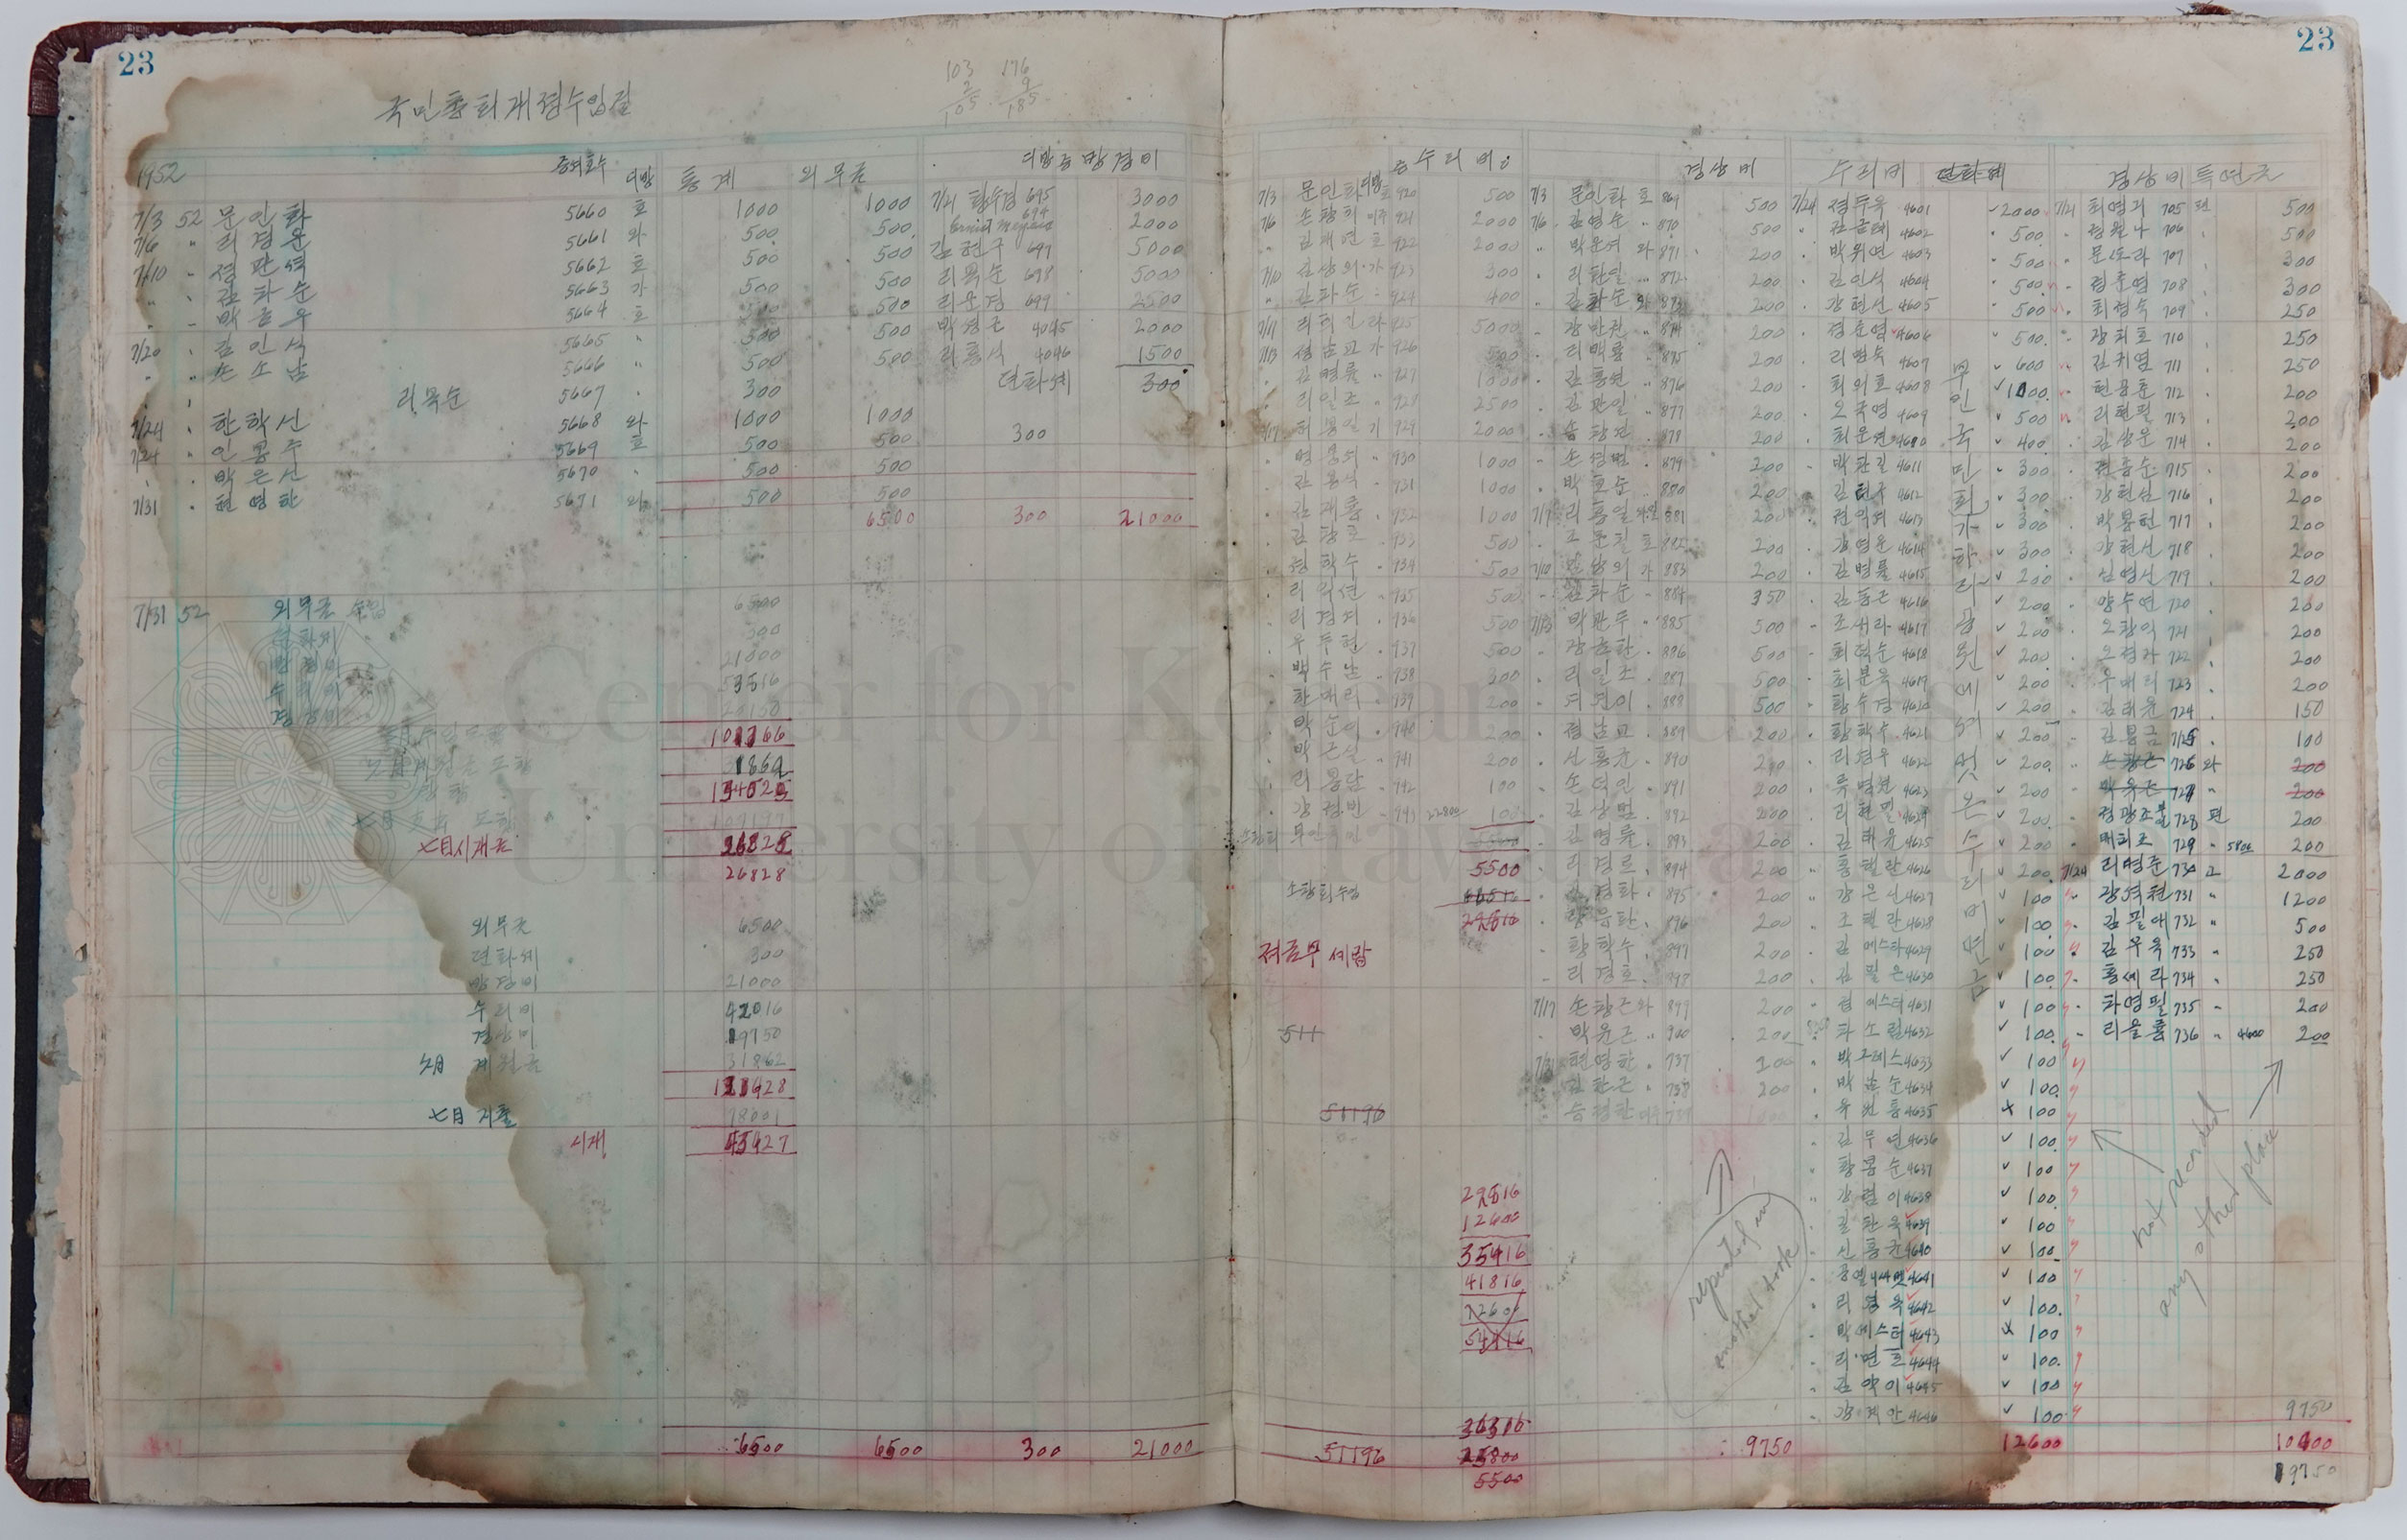 Monthly financial records, 1952